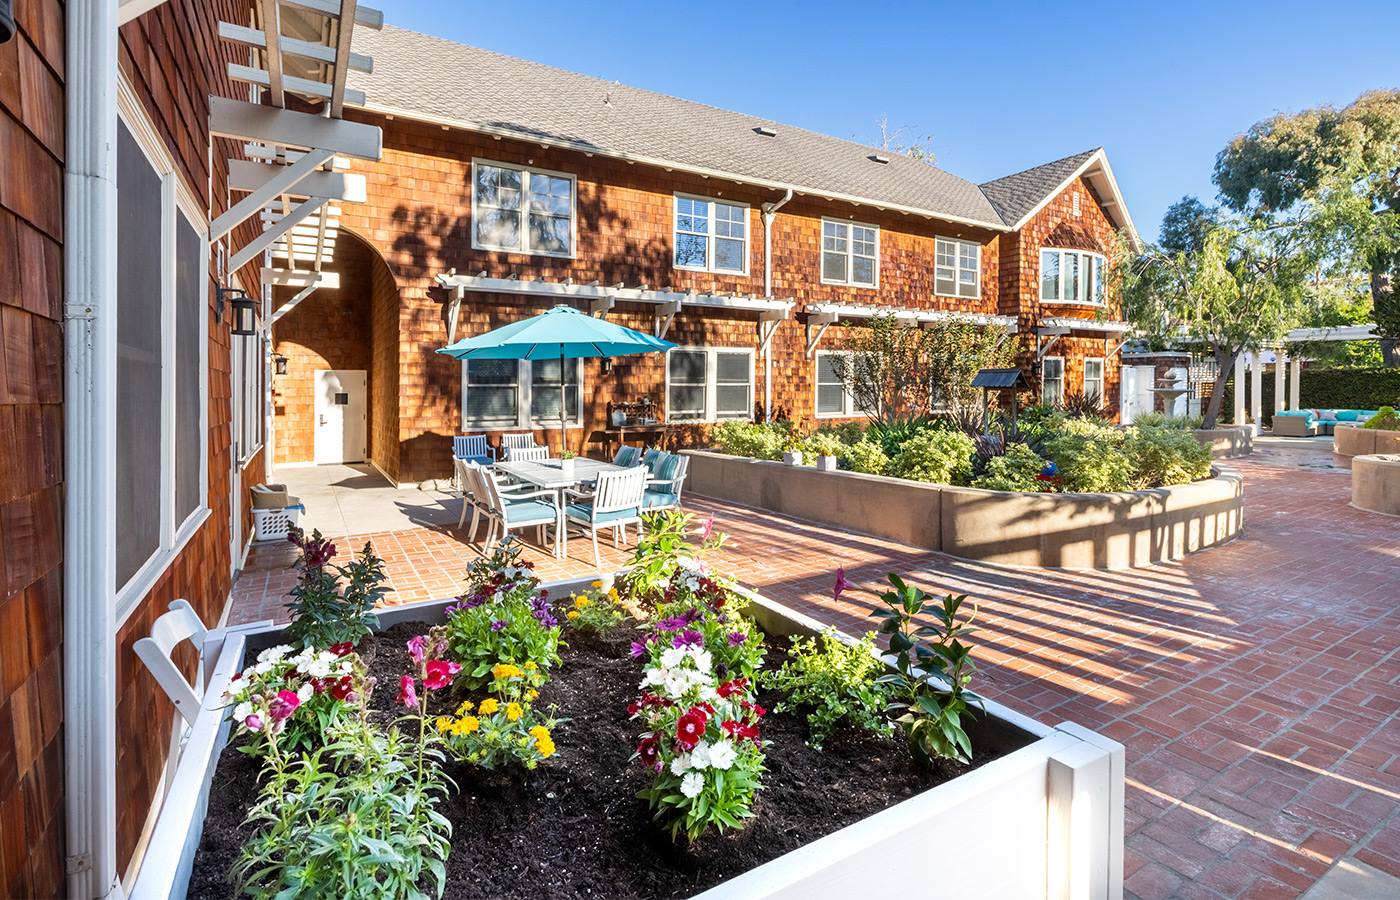 Patio and garden at Crown Cove.